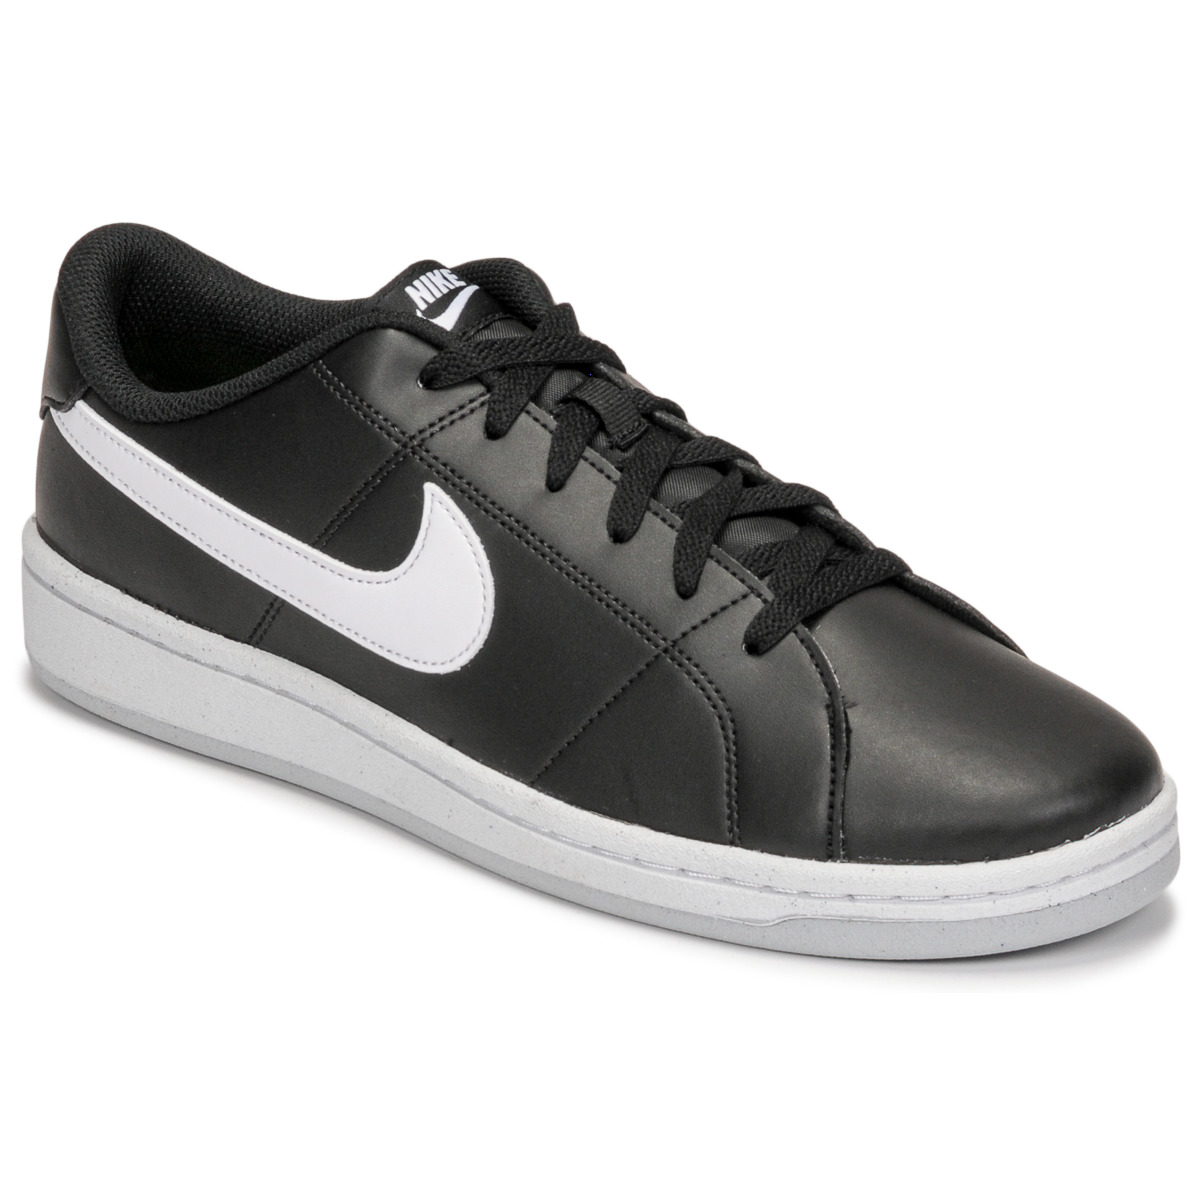 Nike NIKE COURT ROYALE 2 NN Black - Free delivery | Spartoo NET ! - Shoes Low top trainers Men USD/$64.00